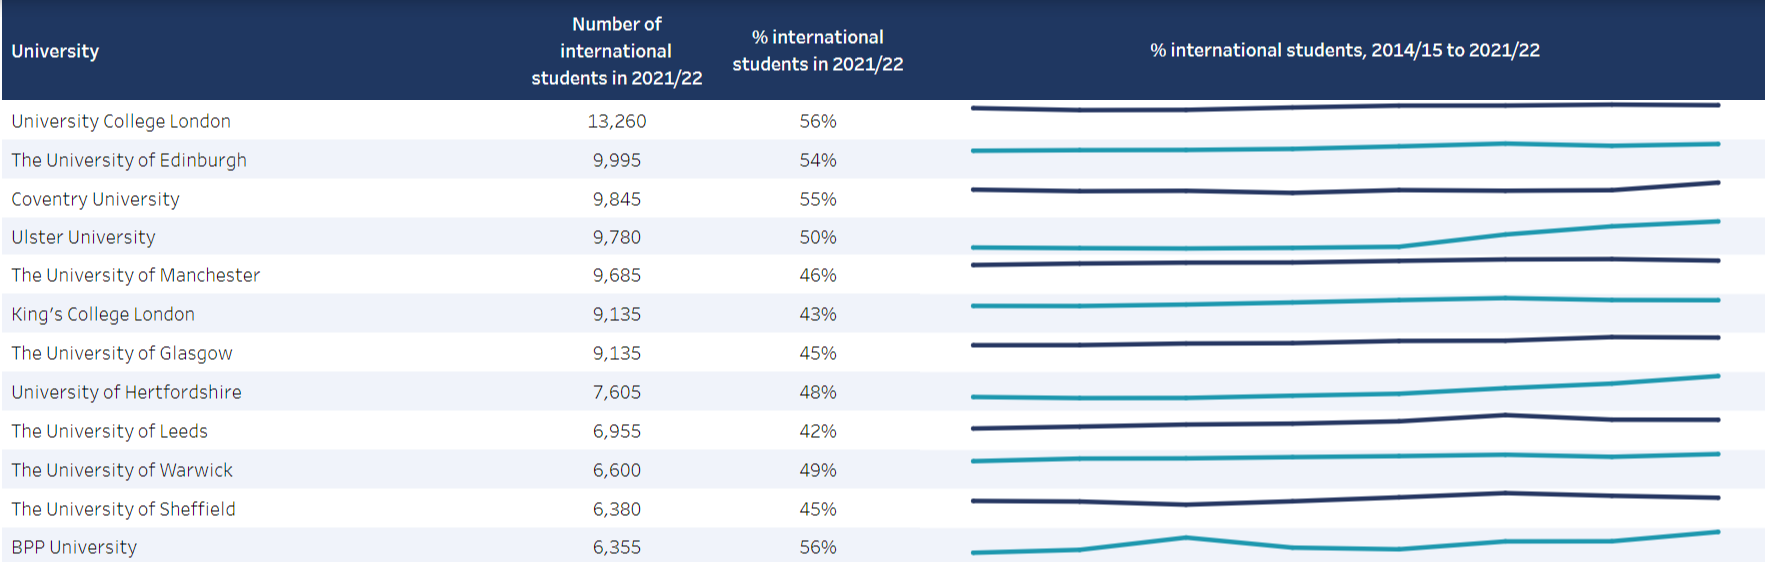 UK Universities with Highest Numbers of International Students